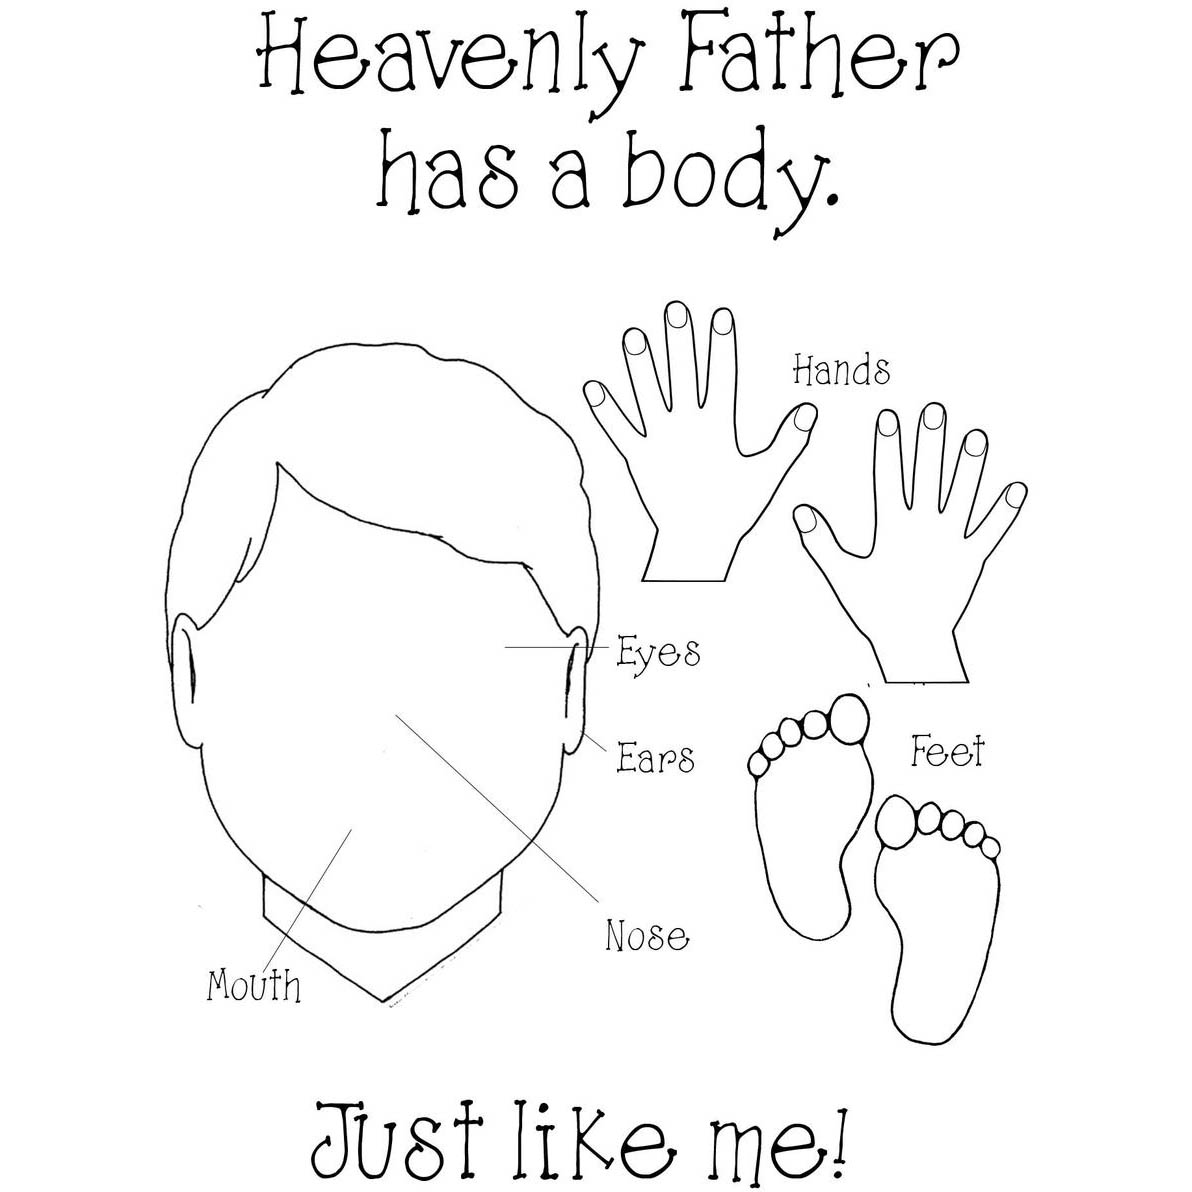 Free Father's Day Coloring Pages Heavenly Father has a Body printable